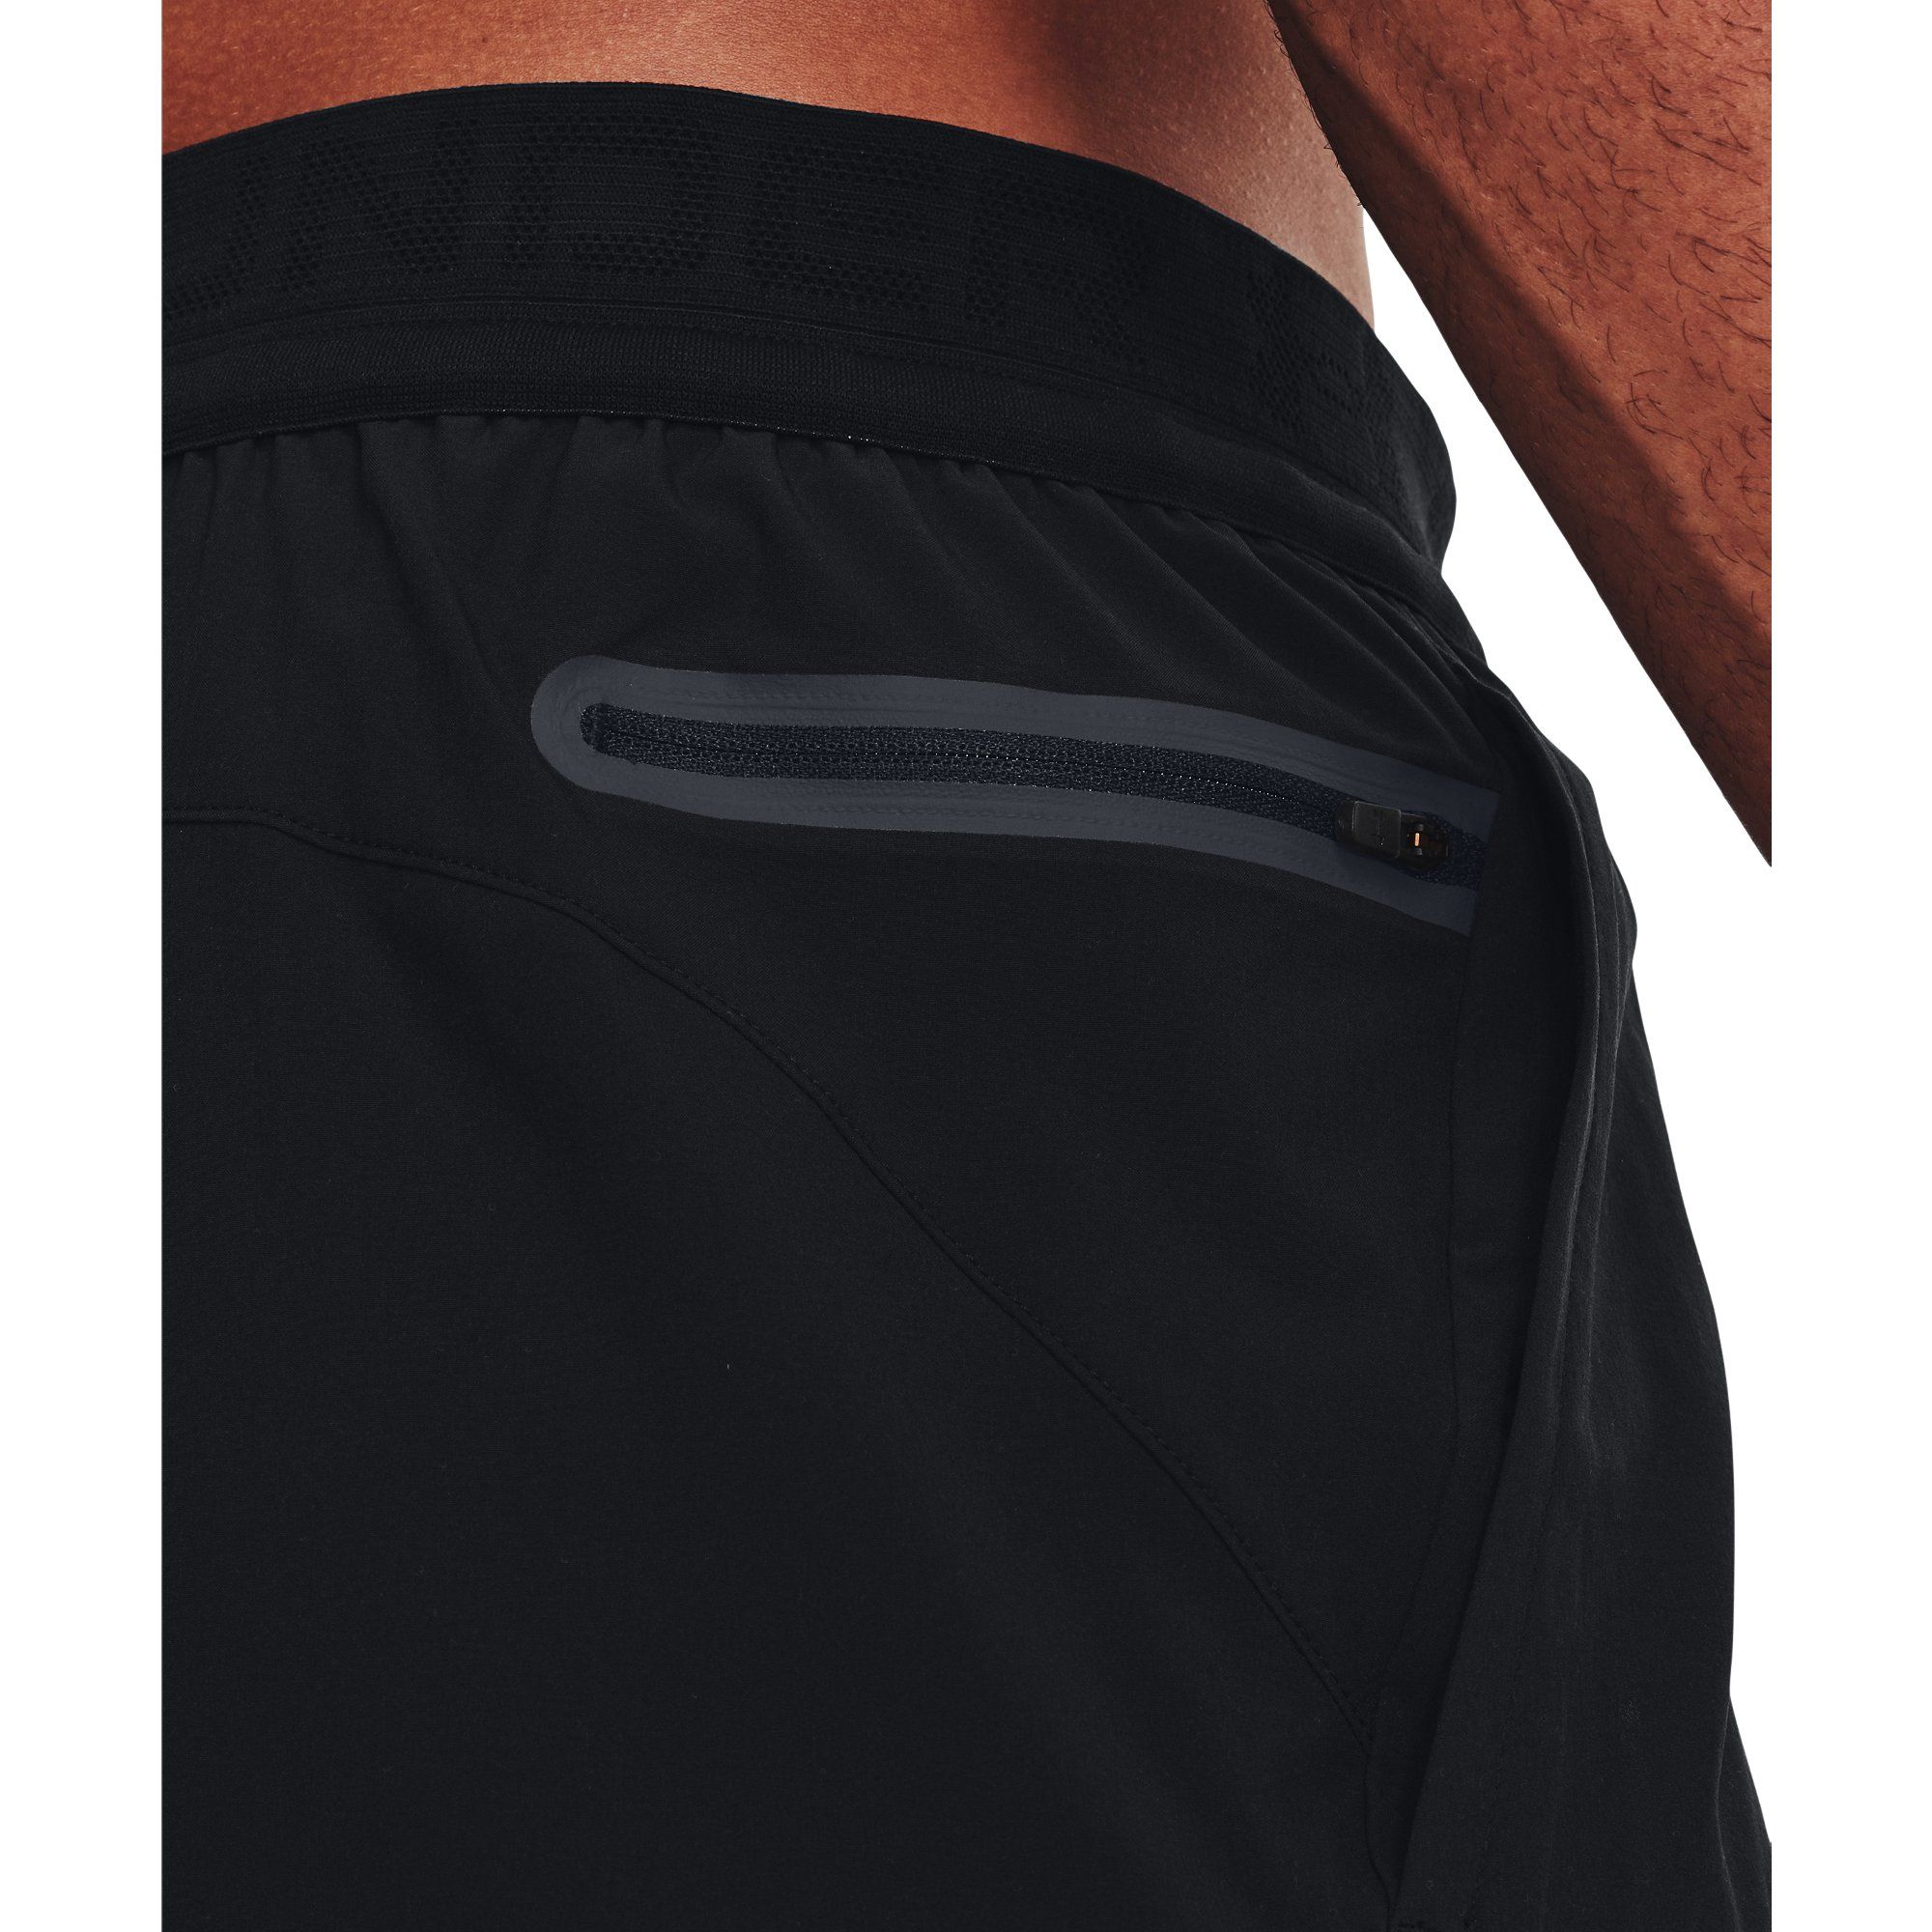  Under Armour Peak Woven Shorts - Black / Pitch Gray 